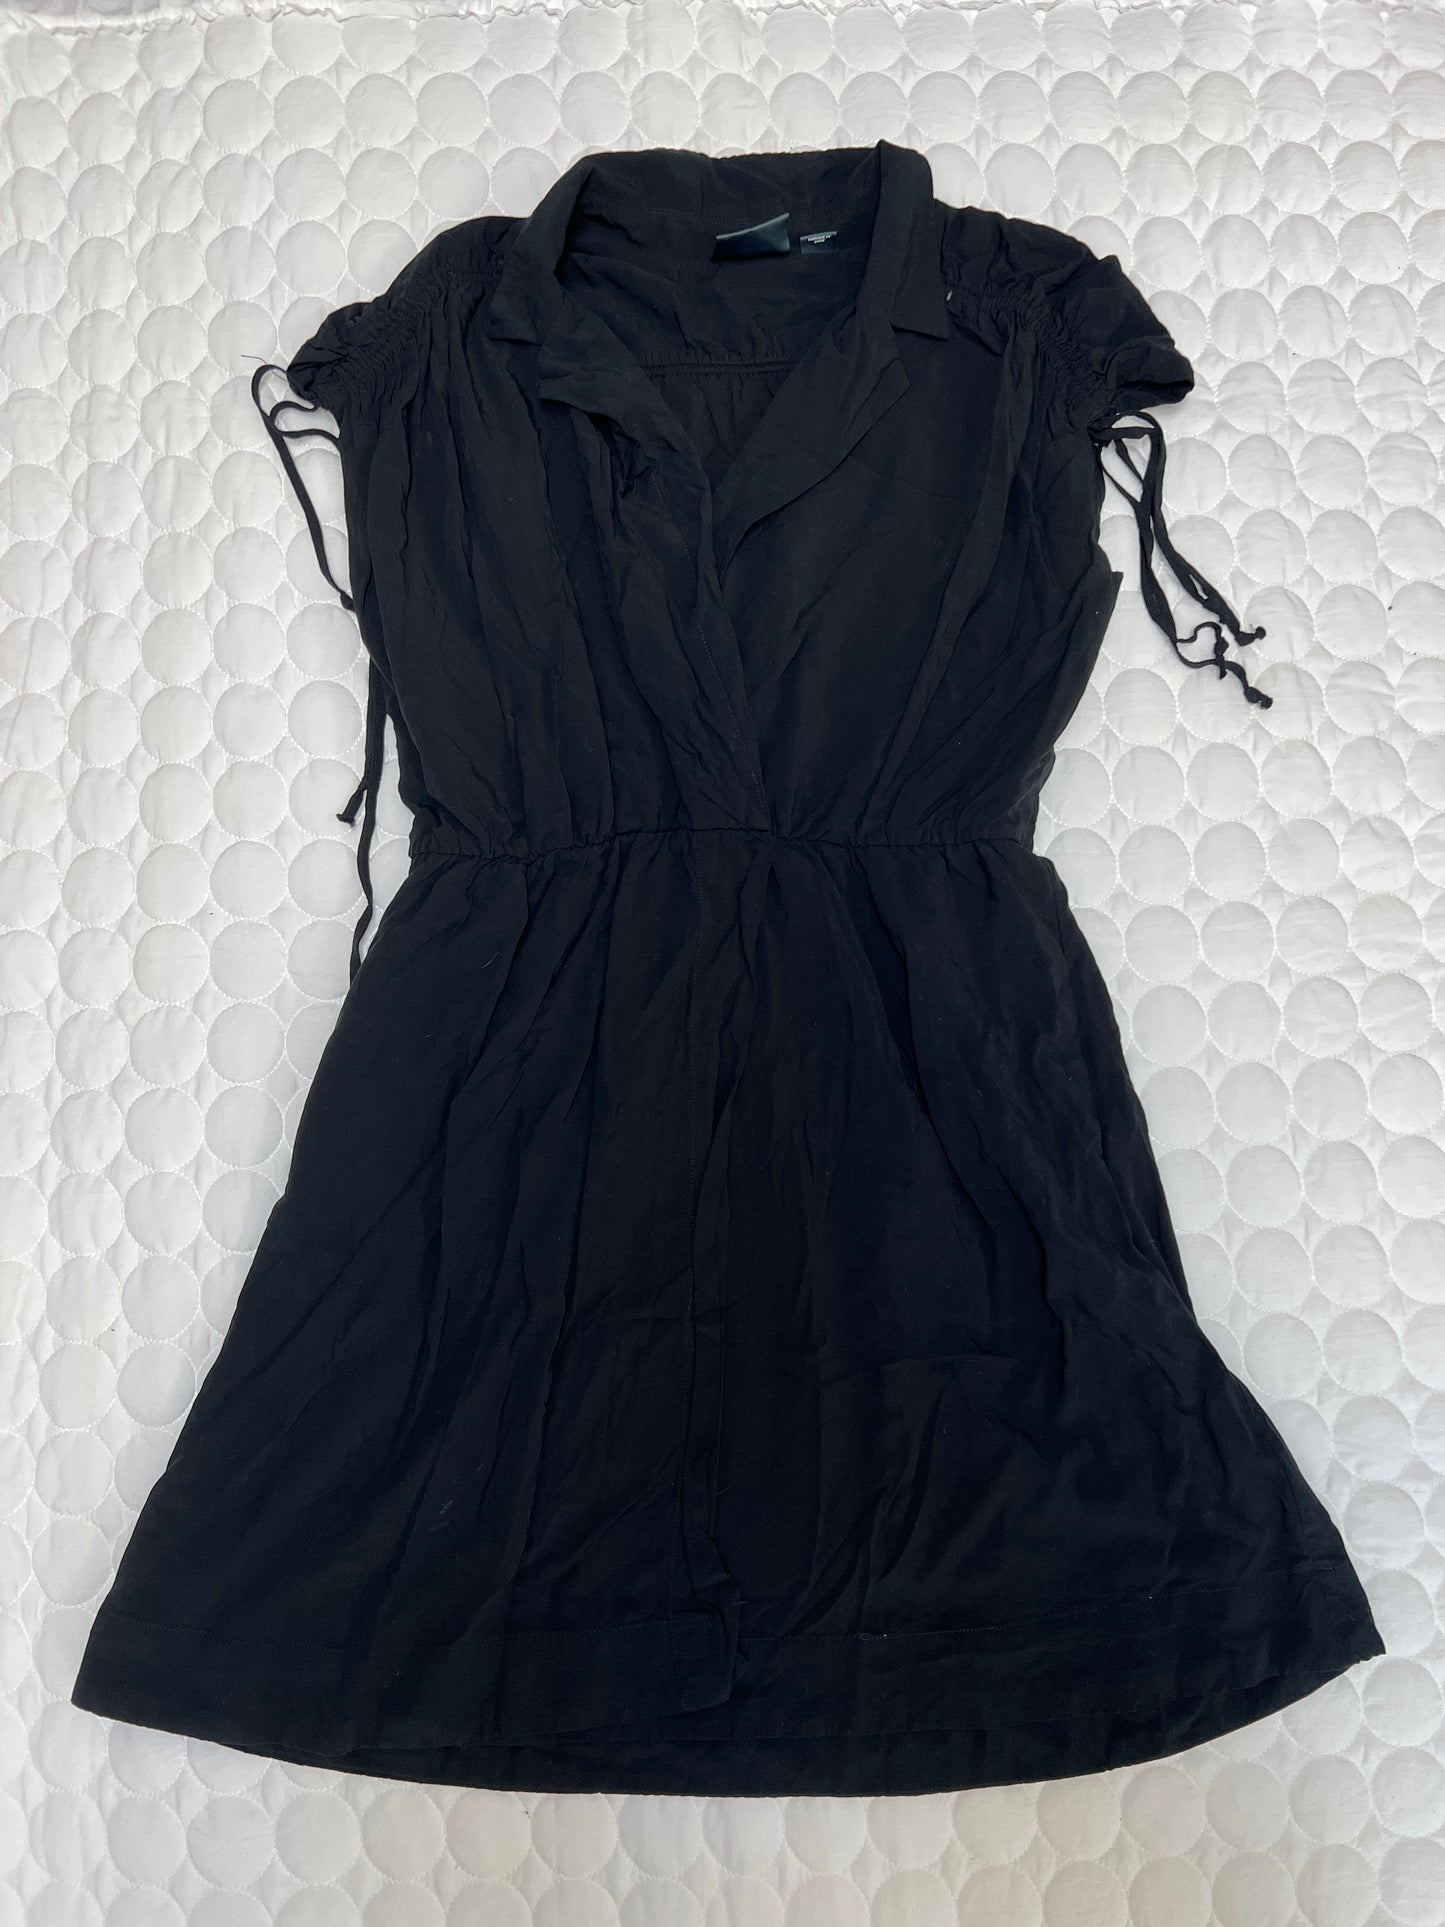 Size L Maeve black dress with gathered waist and ties on sleeves. VGUC.